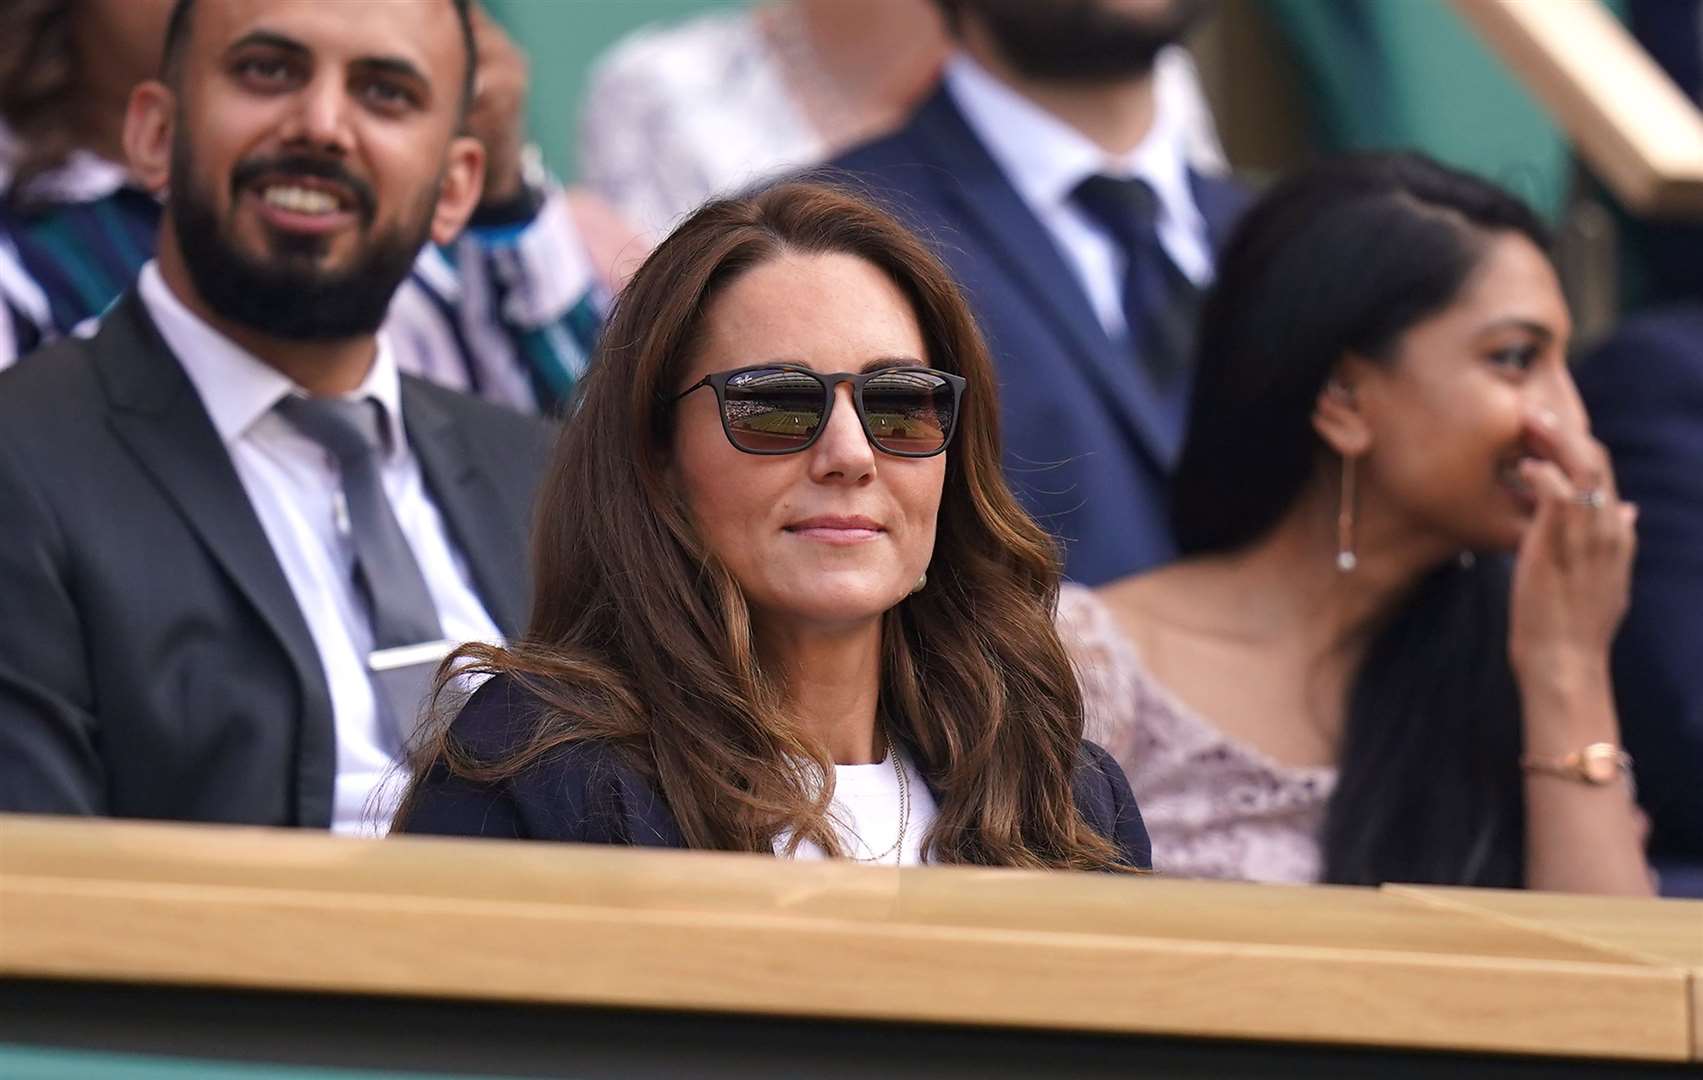 Kate in the royal box on Centre Court at Wimbledon – her last public event before being told to self-isolate (Adam Davy/PA)